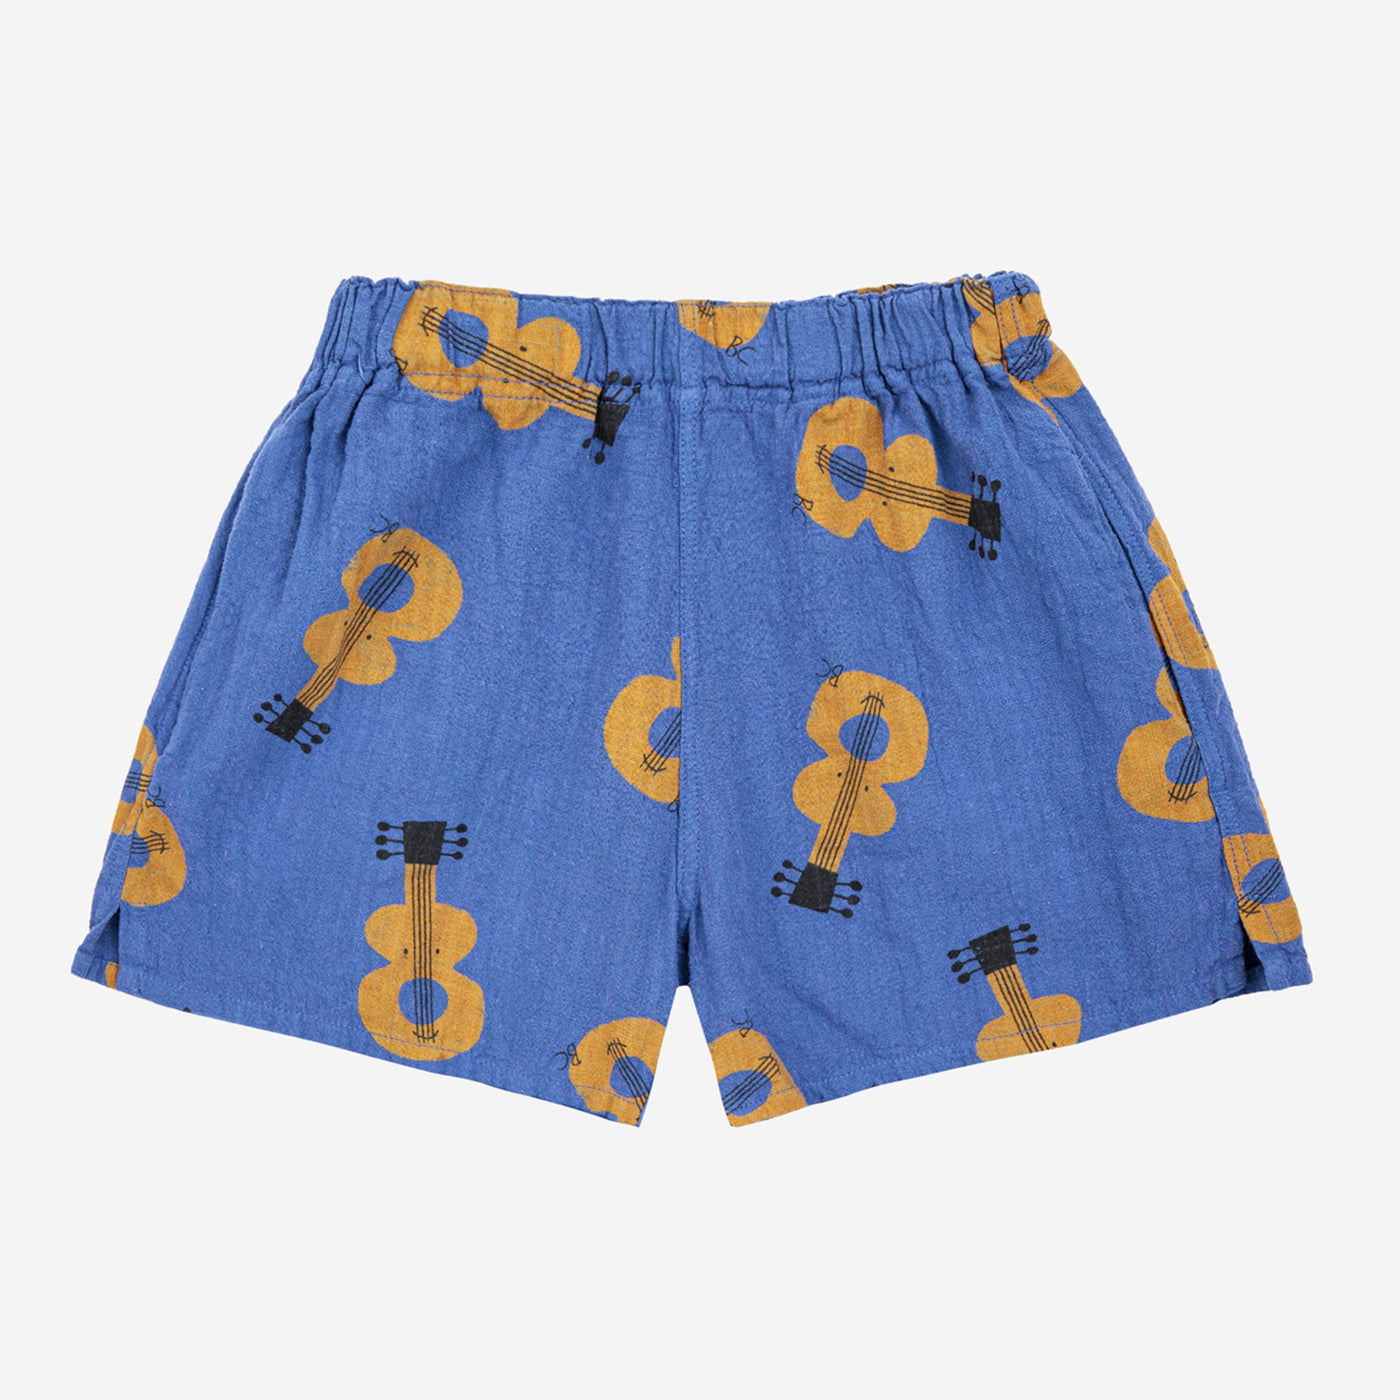 Acoustic Guitar All Over Woven Shorts by Bobo Choses - Petite Belle